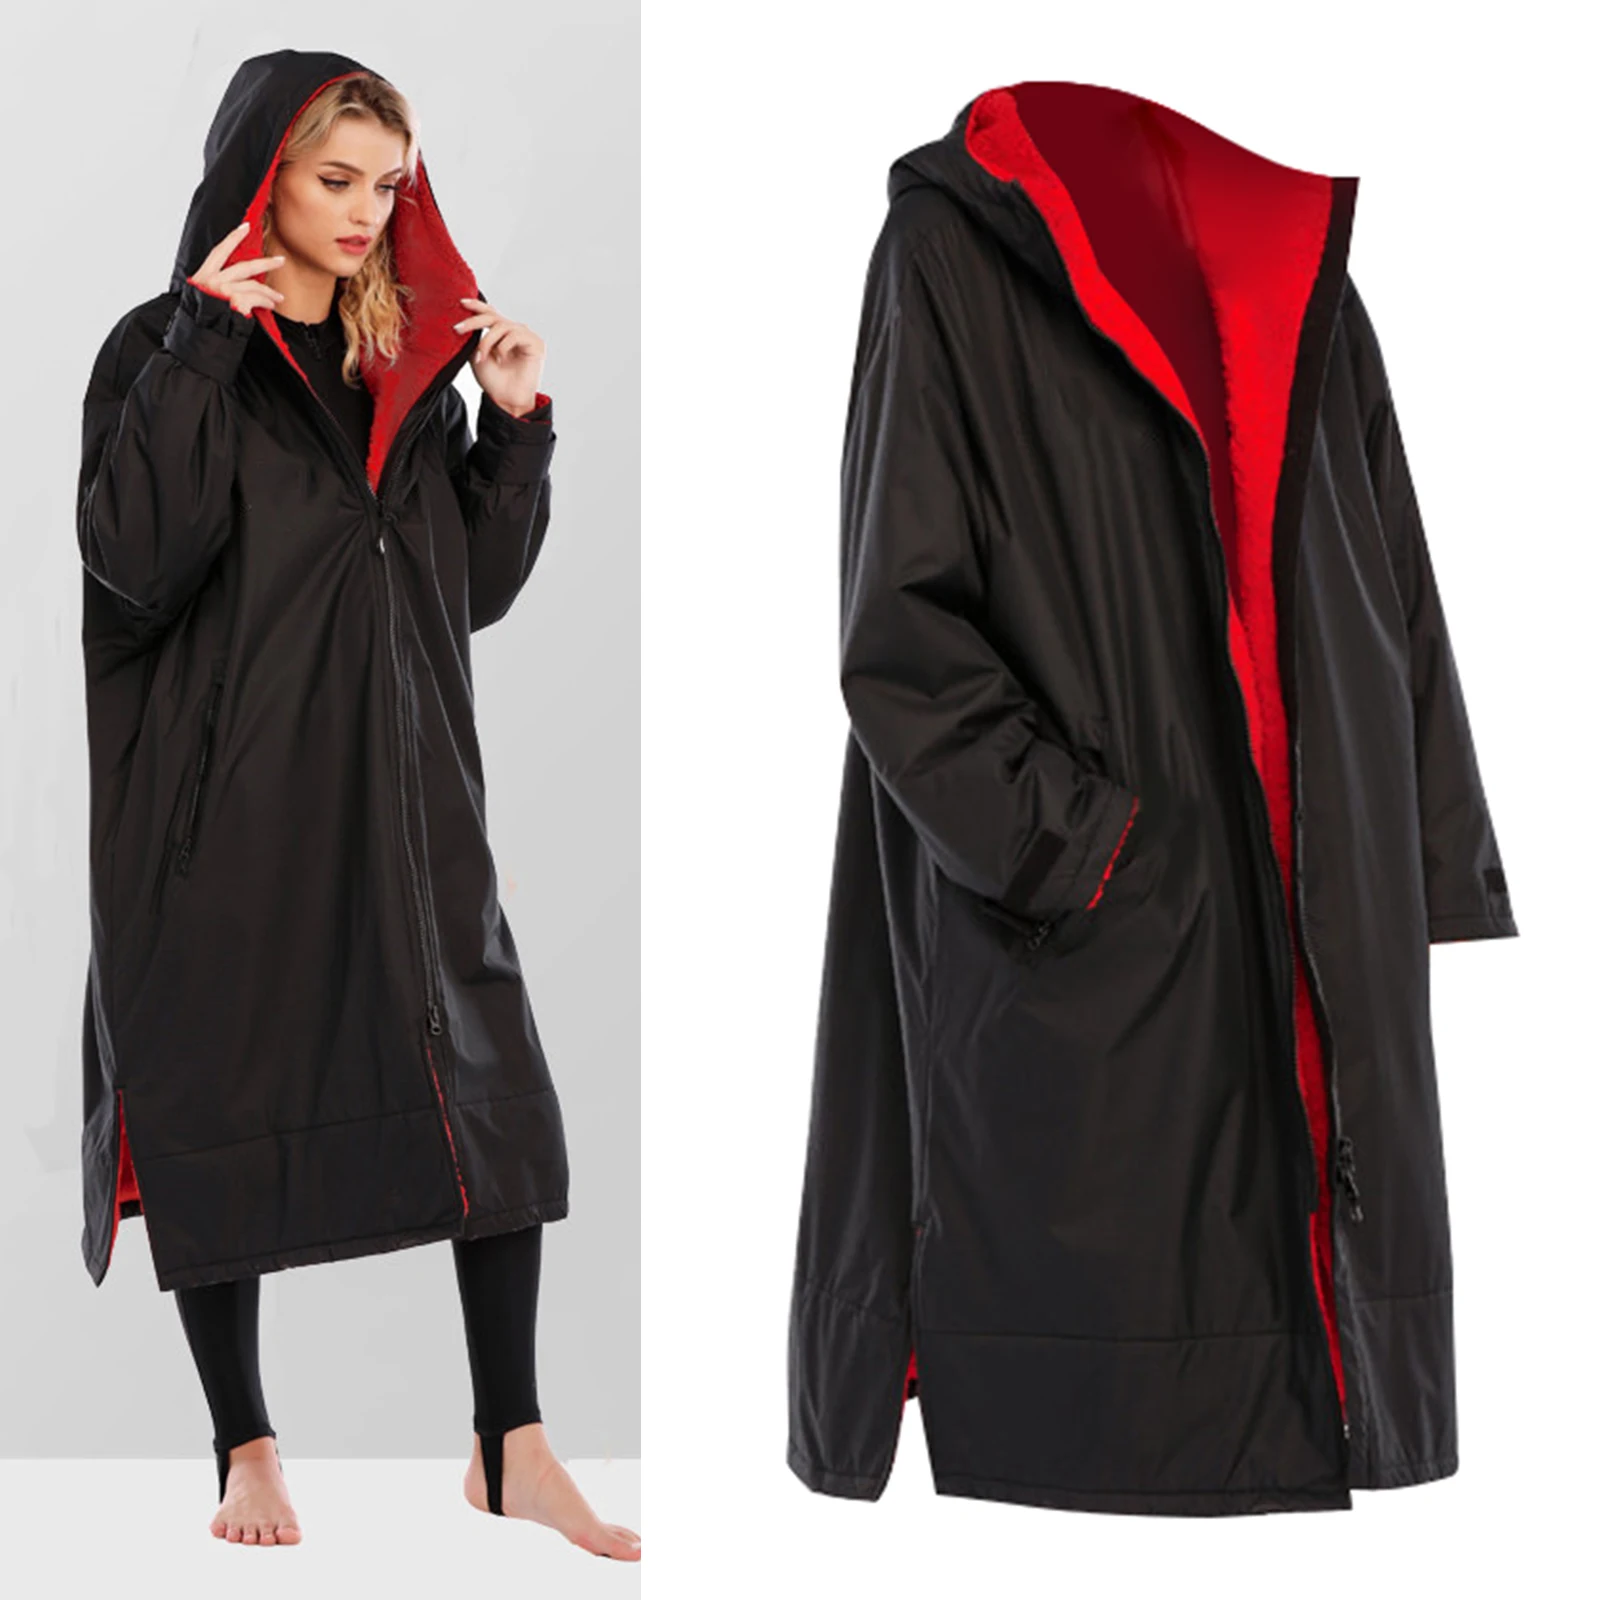 Waterproof Surf Changing Robe Coat Swim Quick Drying Jacket Weatherproof Poncho Cloak Parka Outwear for Outdoor Sports Swimming